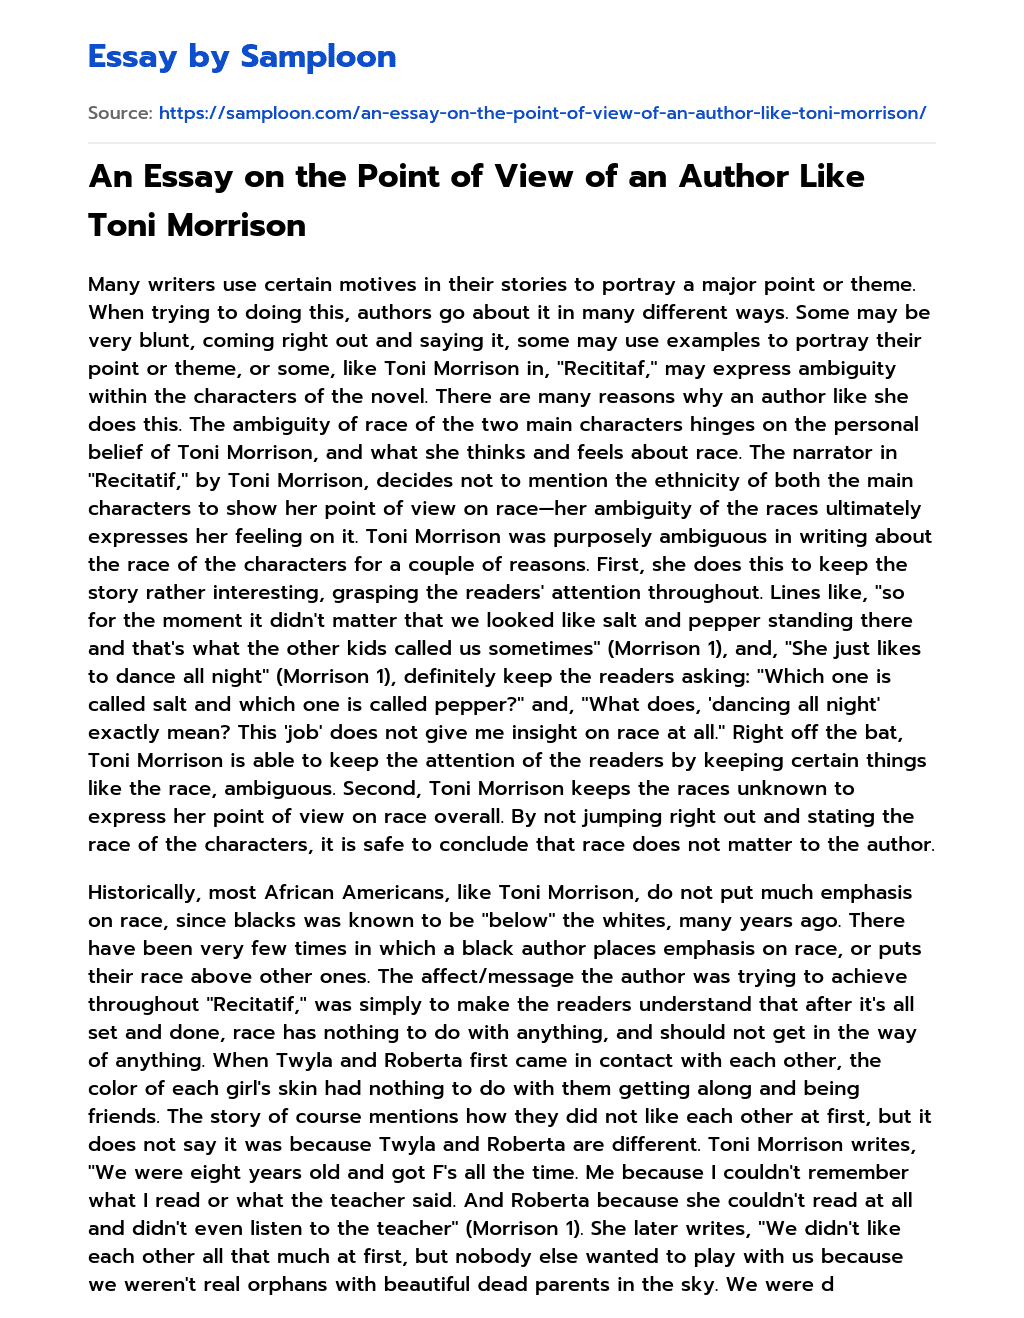 An Essay on the Point of View of an Author Like Toni Morrison essay